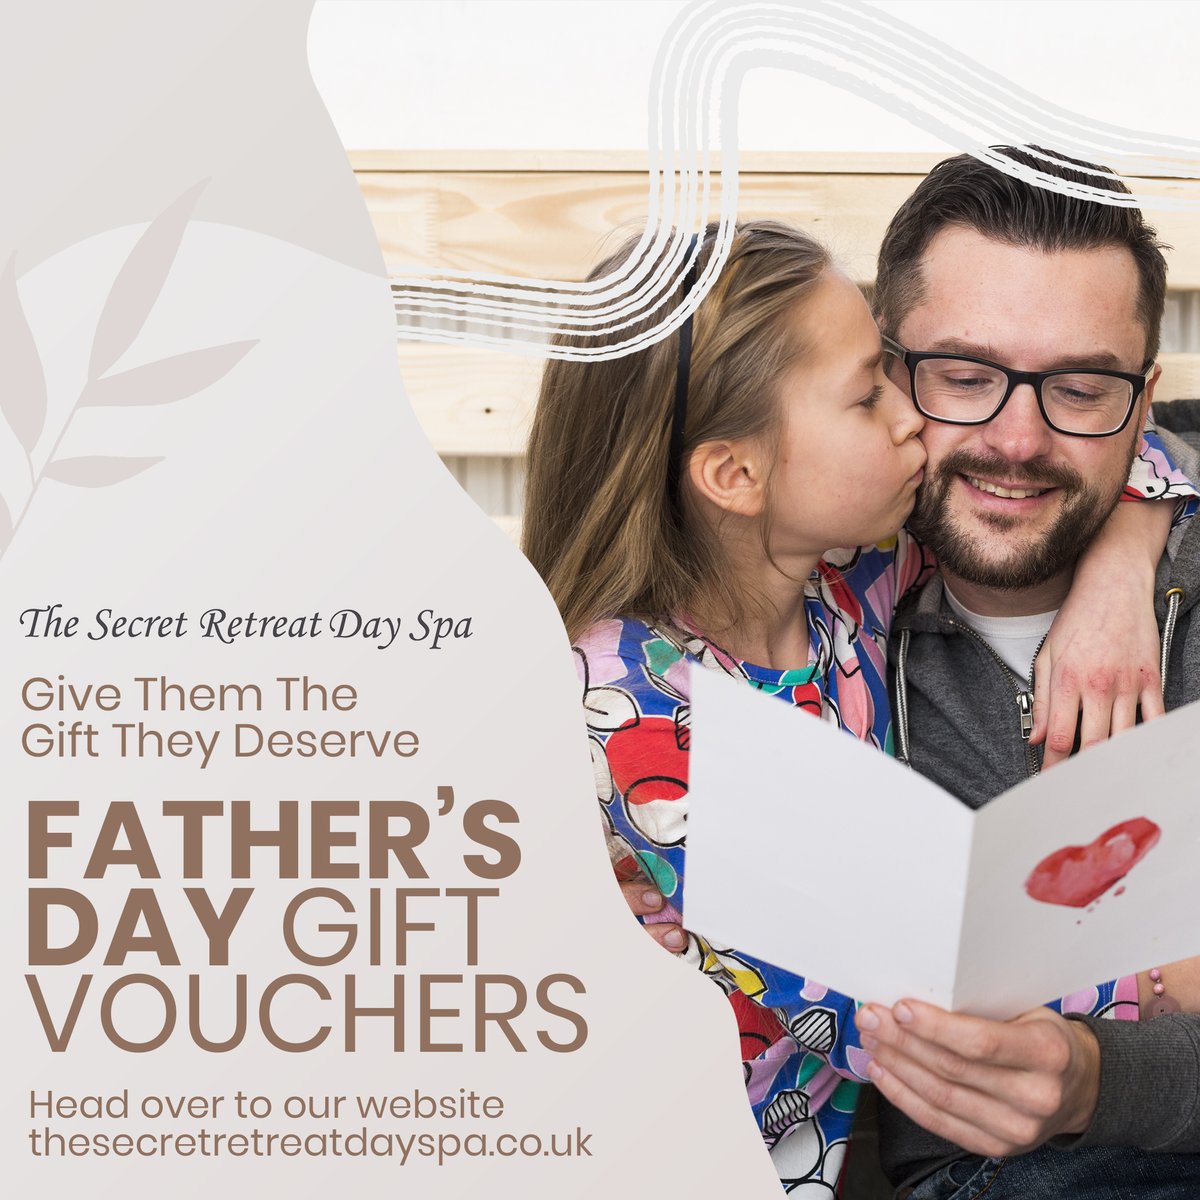 Treat your Dad this Fathers’ Day with a Secret Retreat Gift Voucher. To view our full range of treatments, follow the link below.

thesecretretreatdayspa.co.uk/gift-voucher/?…

#spa #spatreatment #spabreak #spaday #treatment #massage #skincare #wellness #selfcare #relax #ashford